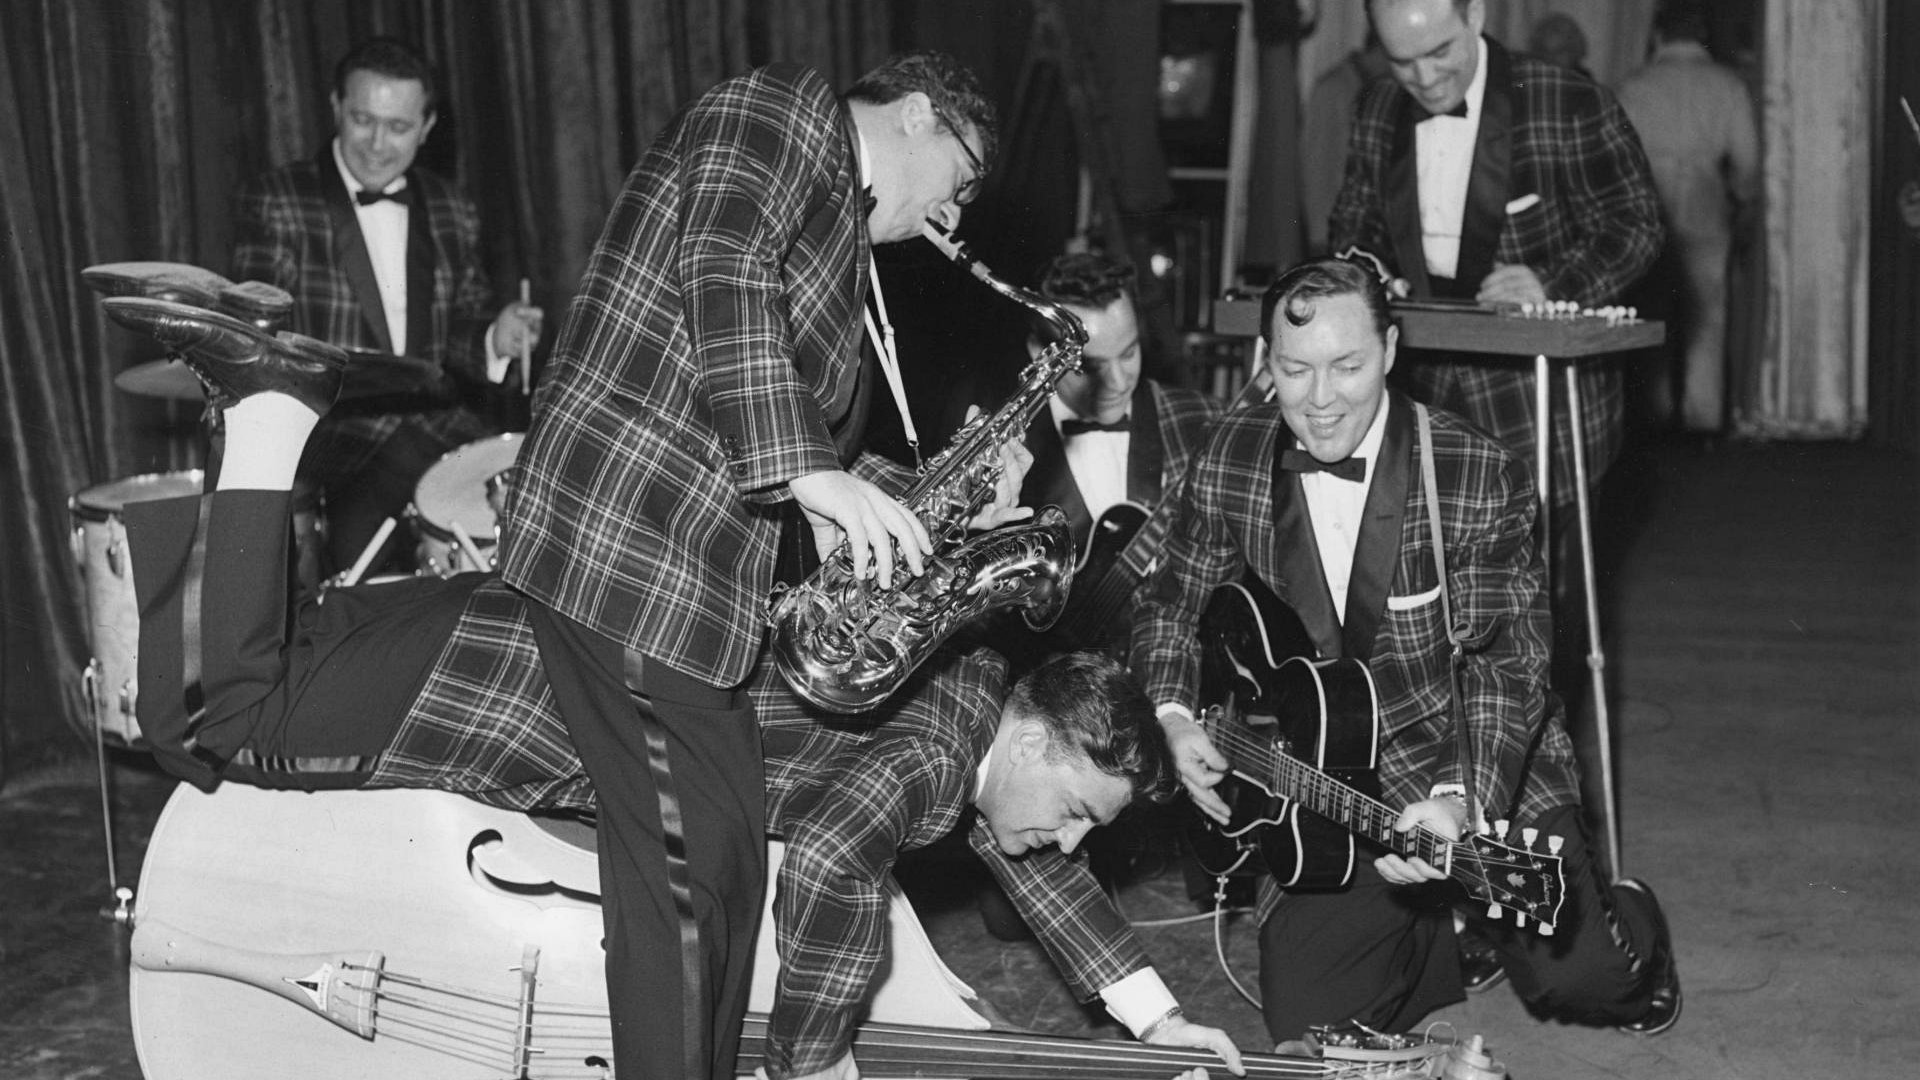 See You Later Alligator av Bill Haley & His Comets